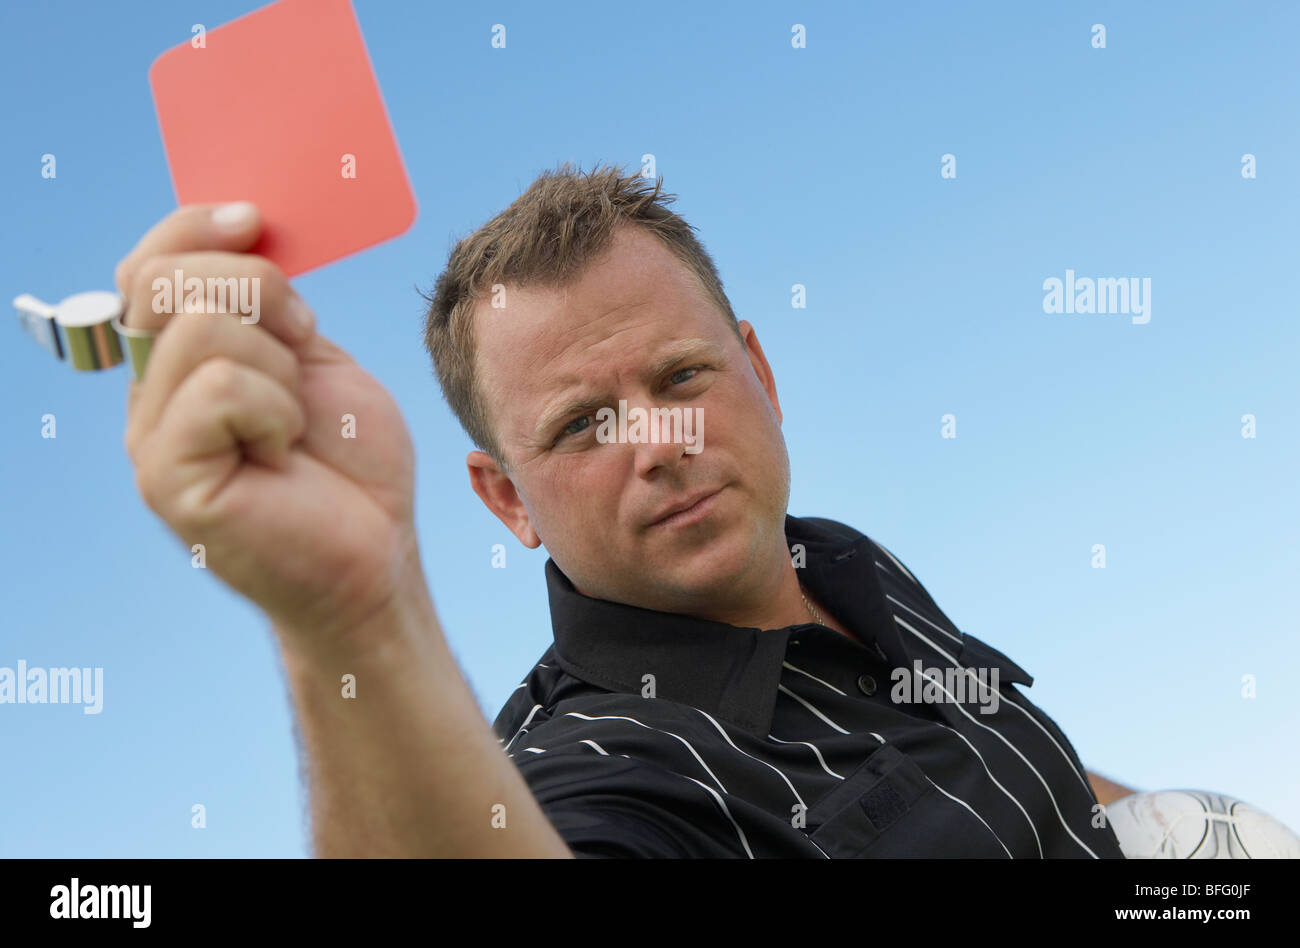 Soccer Referee Showing Red Card Stock Photo